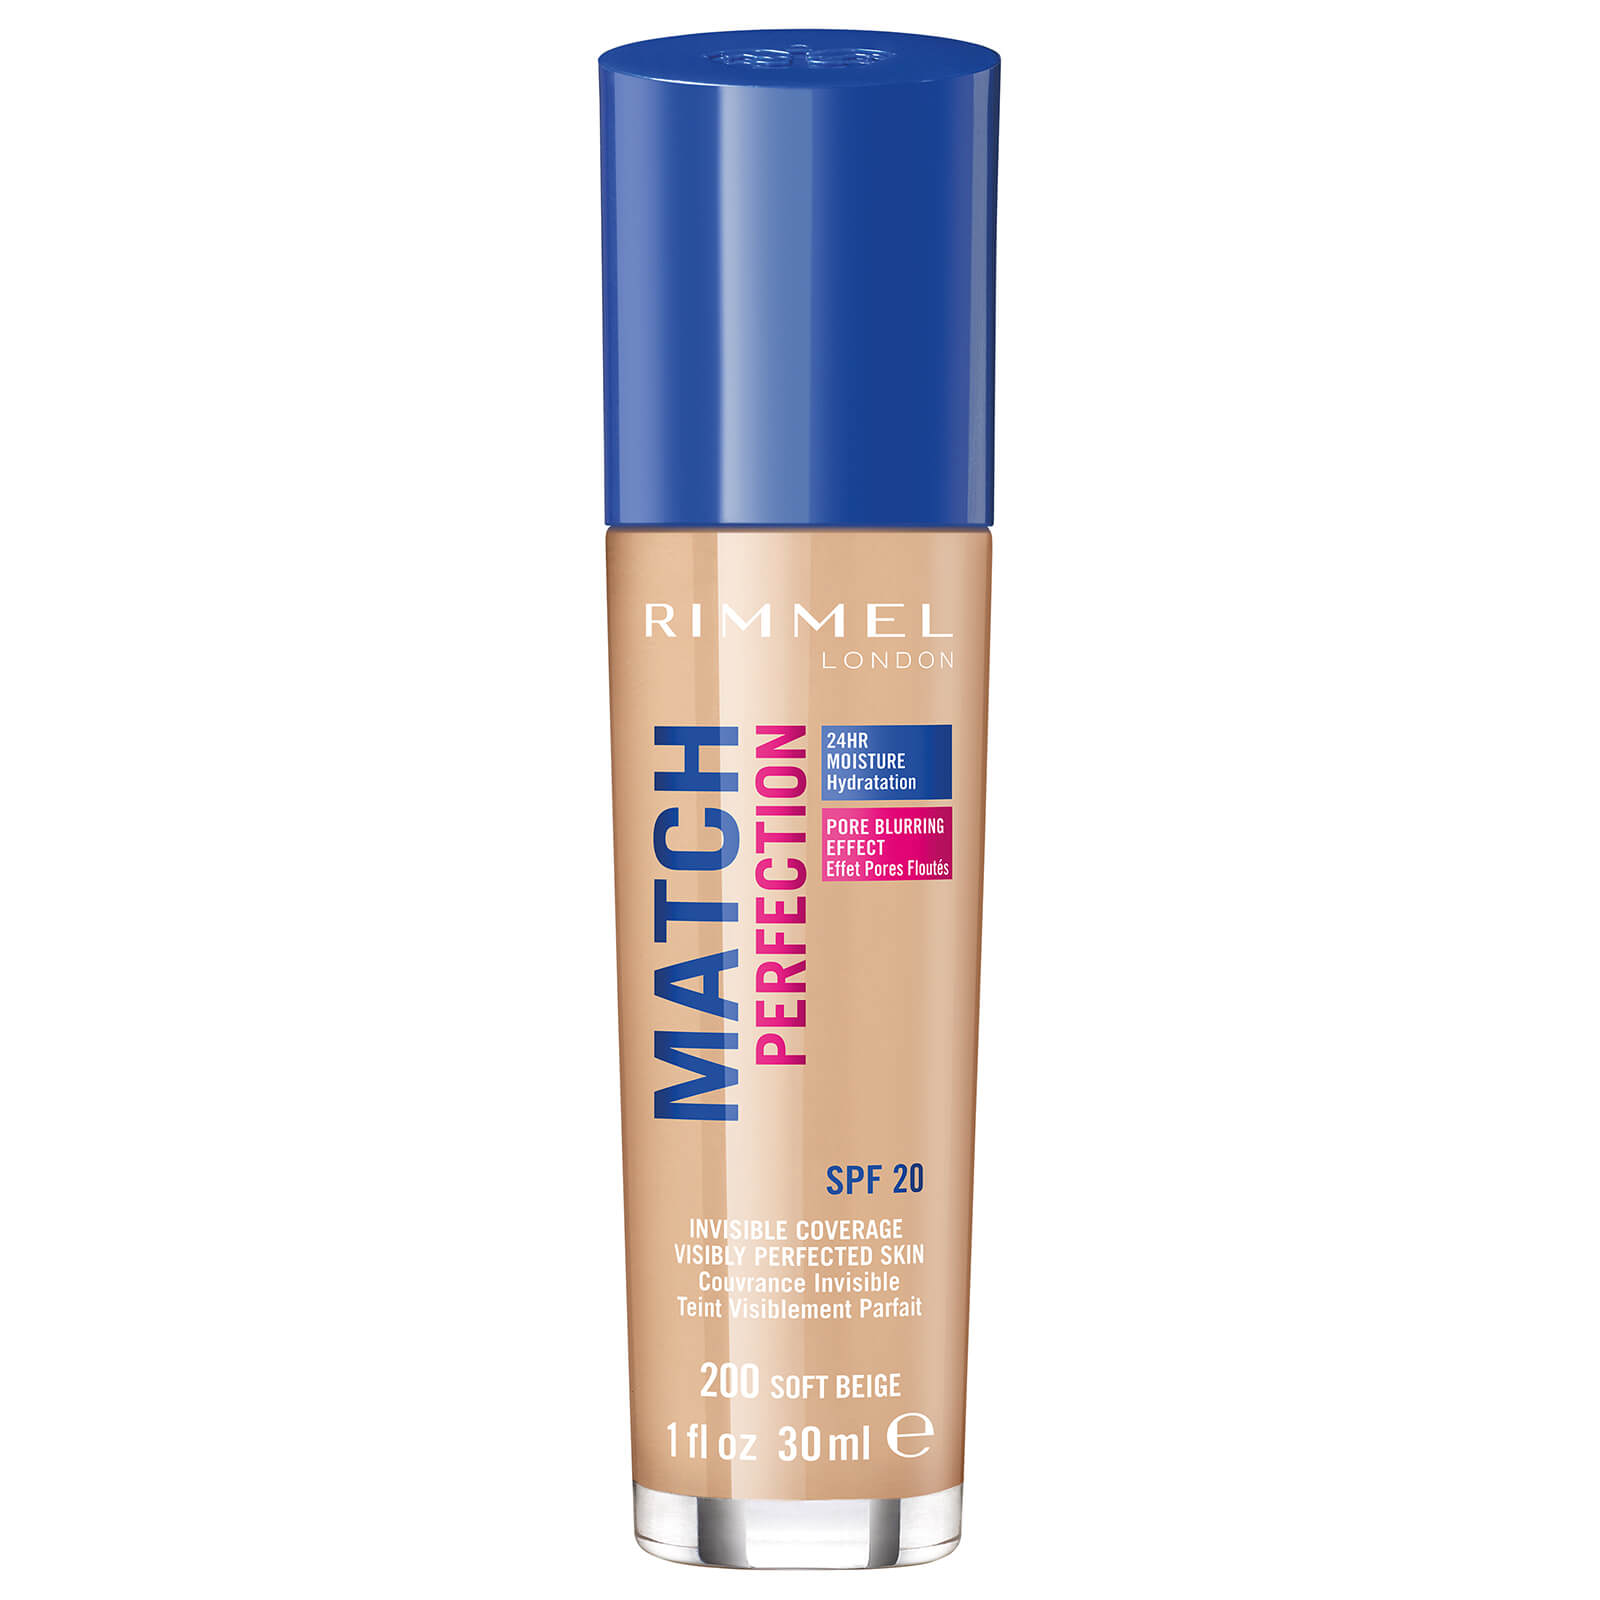 Rimmel Match Perfection Foundation 30ml (Various Shades) - Soft Beige